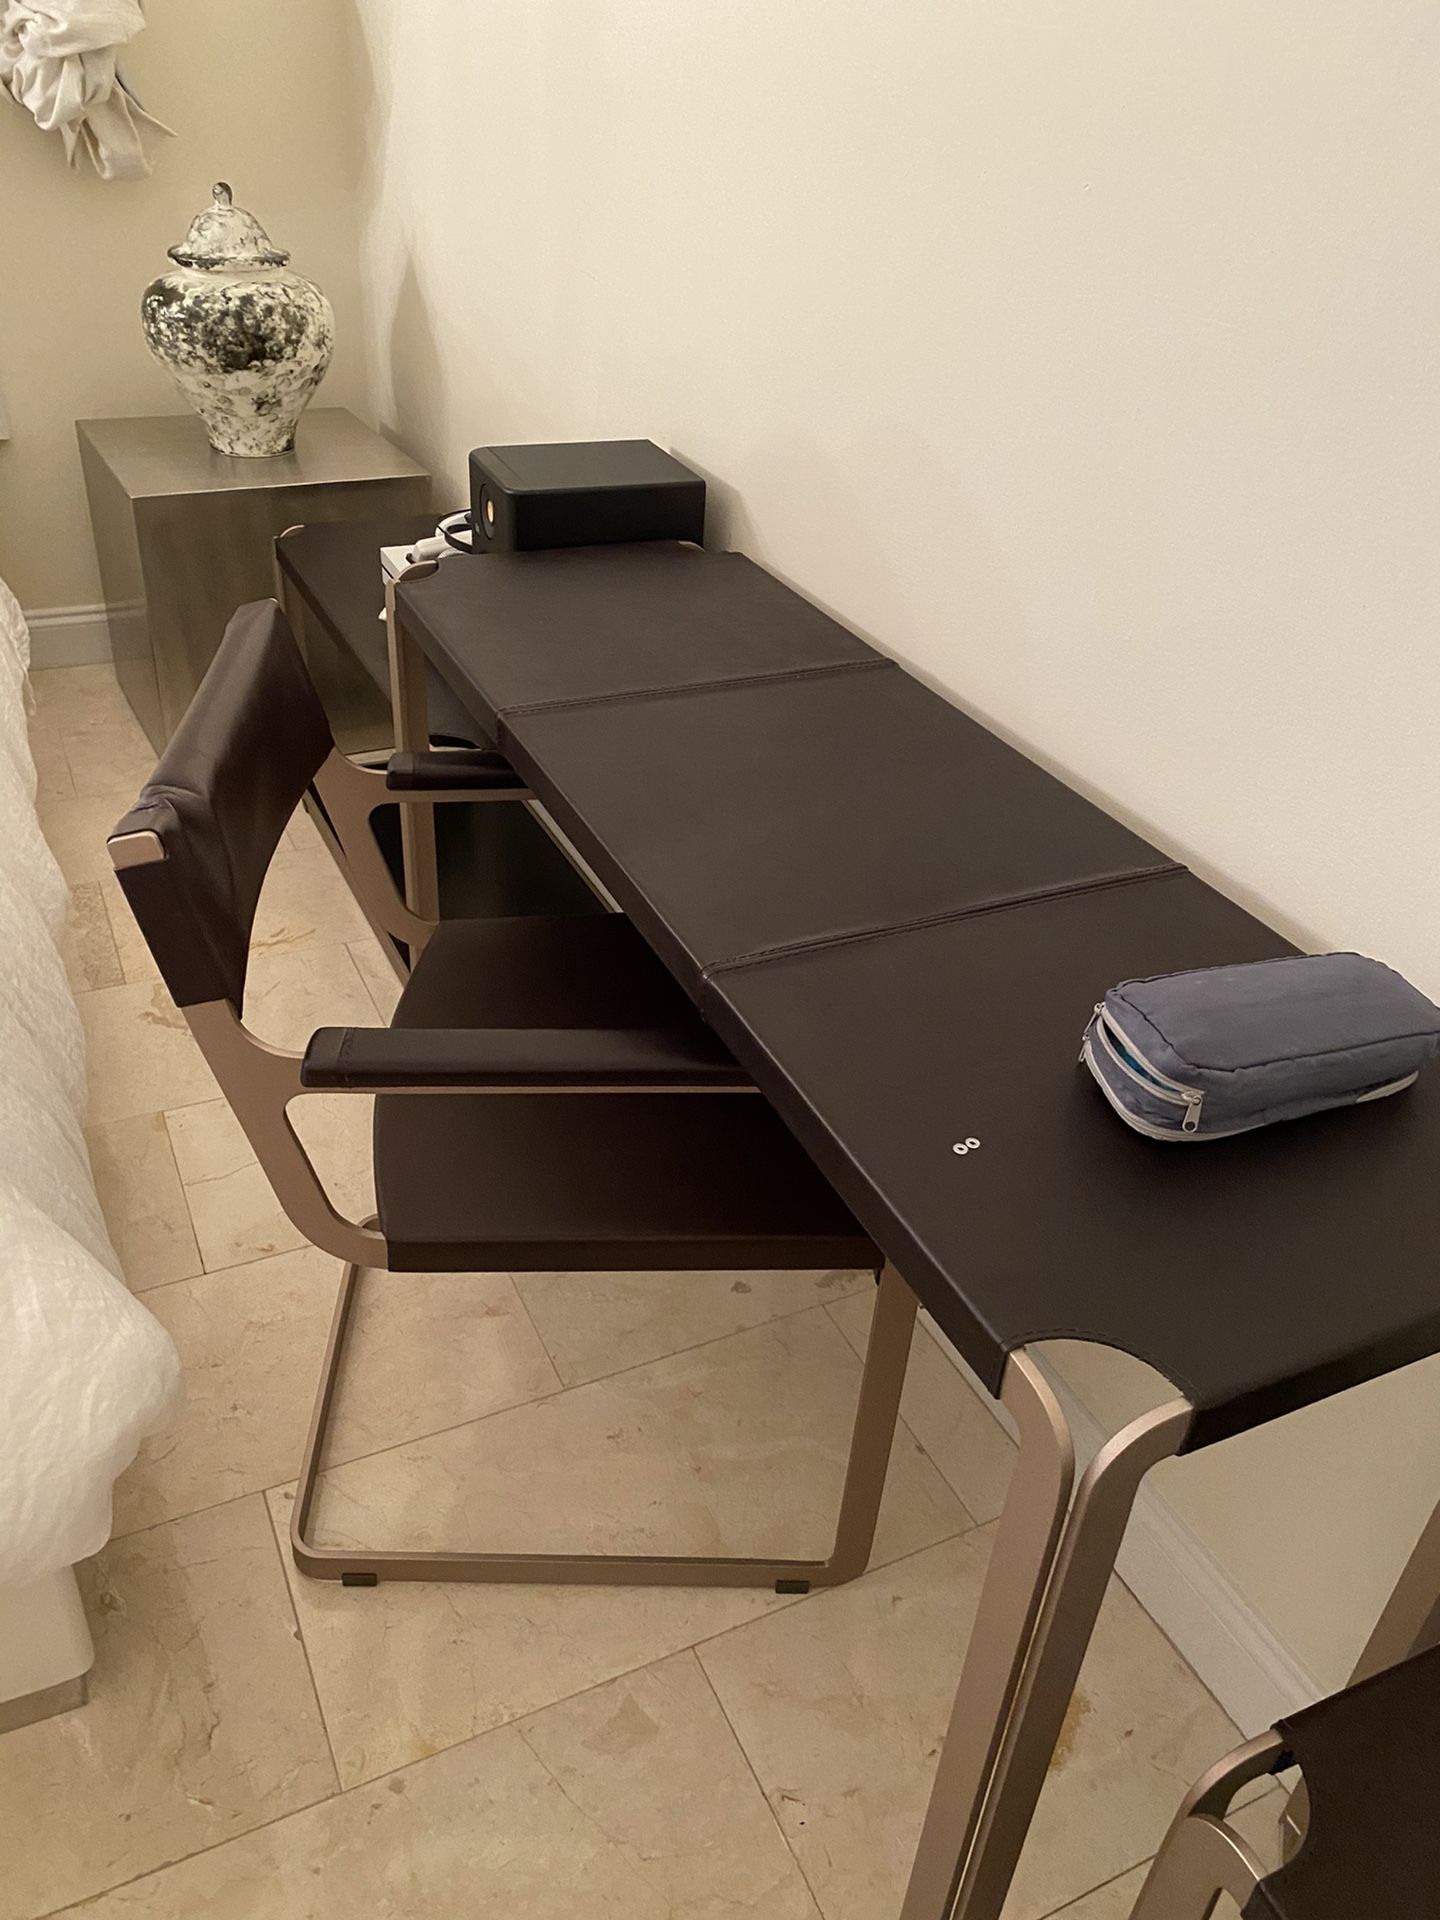 New genuine leather console table desk and chair ret. $4,500